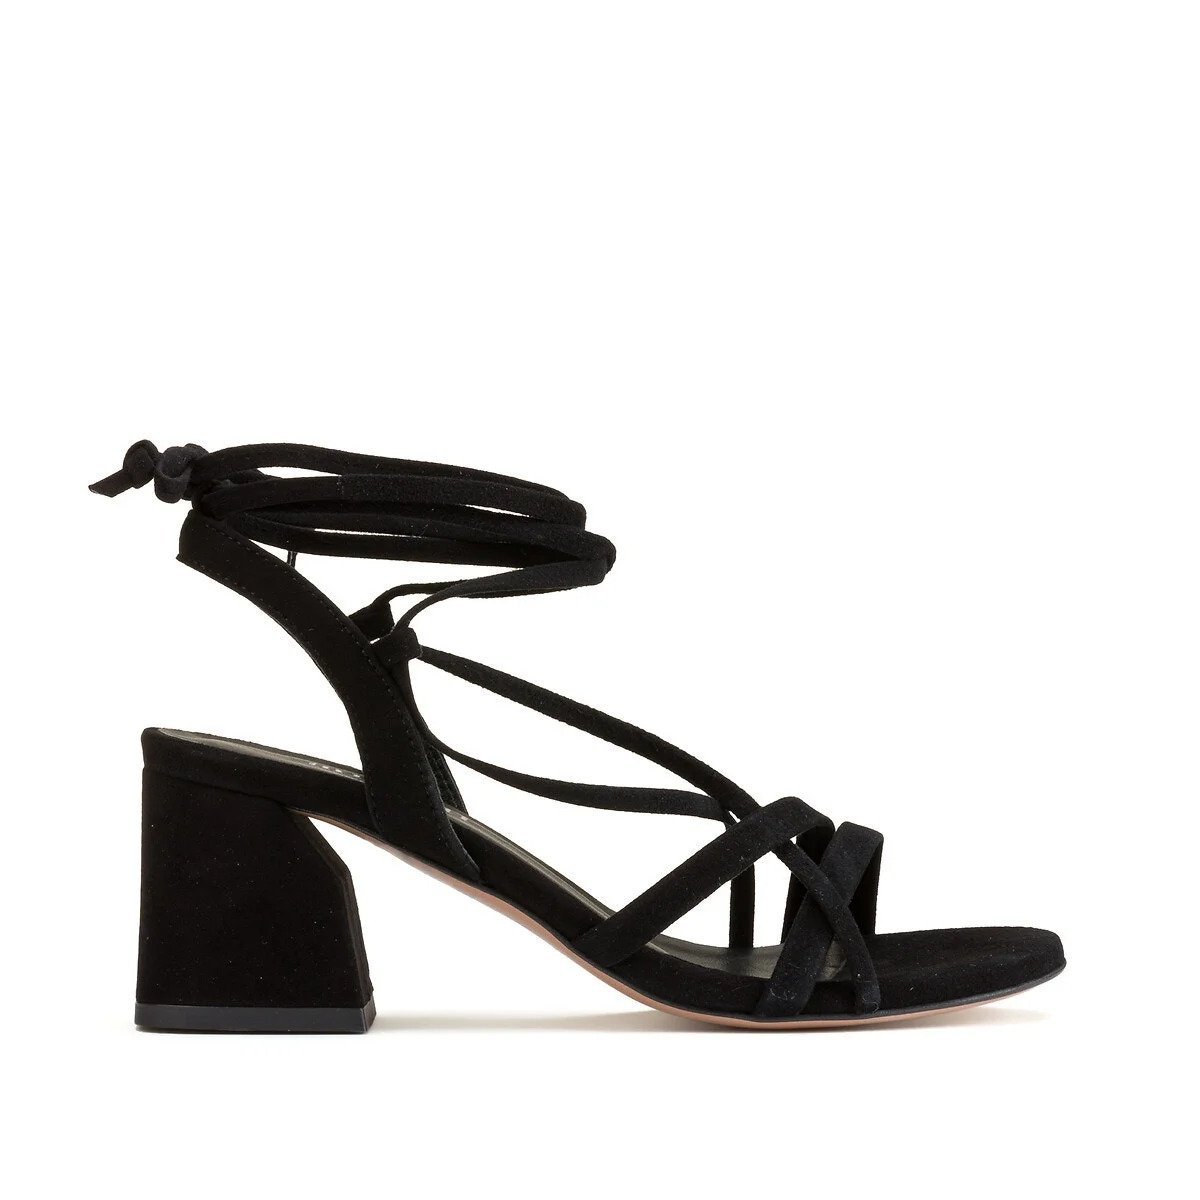 Black heeled sandals for women by Minelli